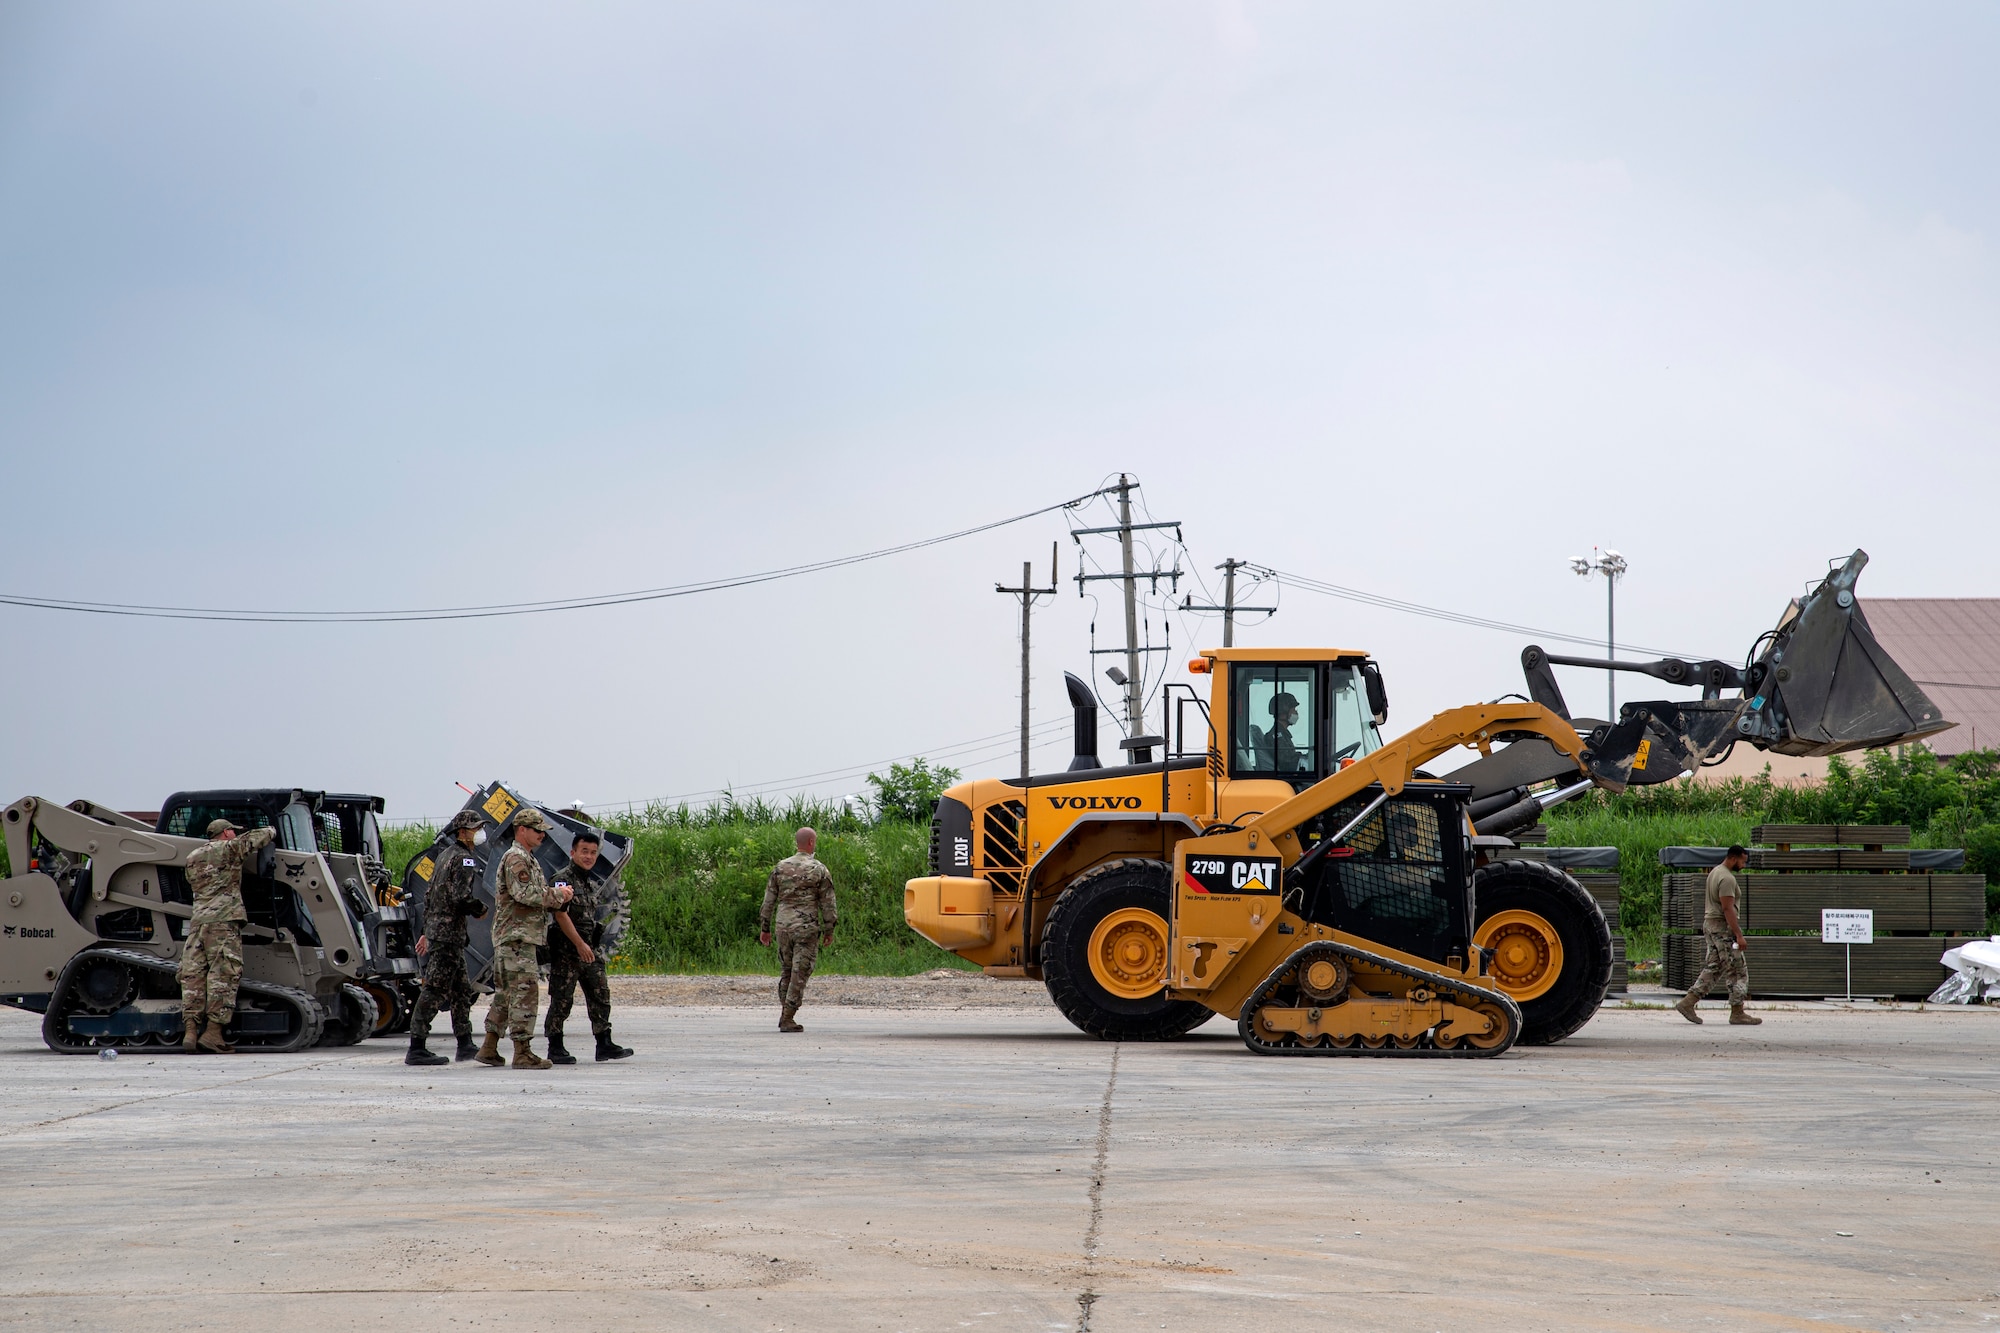 Members assigned to various sections of the 35th Civil Engineer Squadron from Misawa Air Base, Japan, and members of the Republic of Korea Air Force, prepare to conduct a runway event during a bilateral training scenario at Suwon Air Base, Republic of Korea, July 6, 2022.